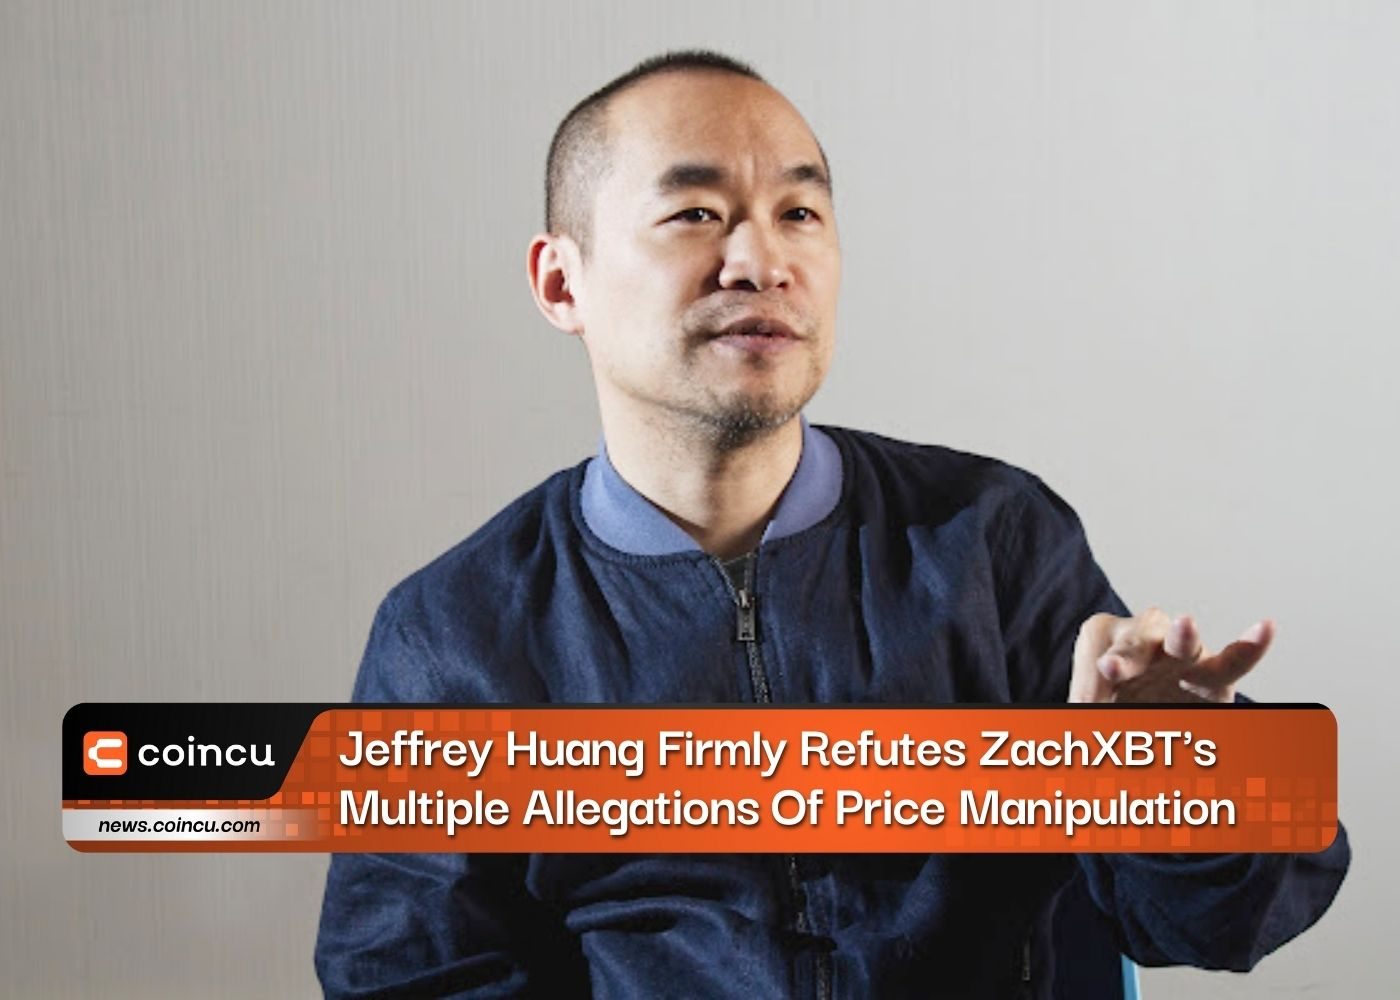 Jeffrey Huang Firmly Refutes ZachXBT's Multiple Allegations Of Price Manipulation